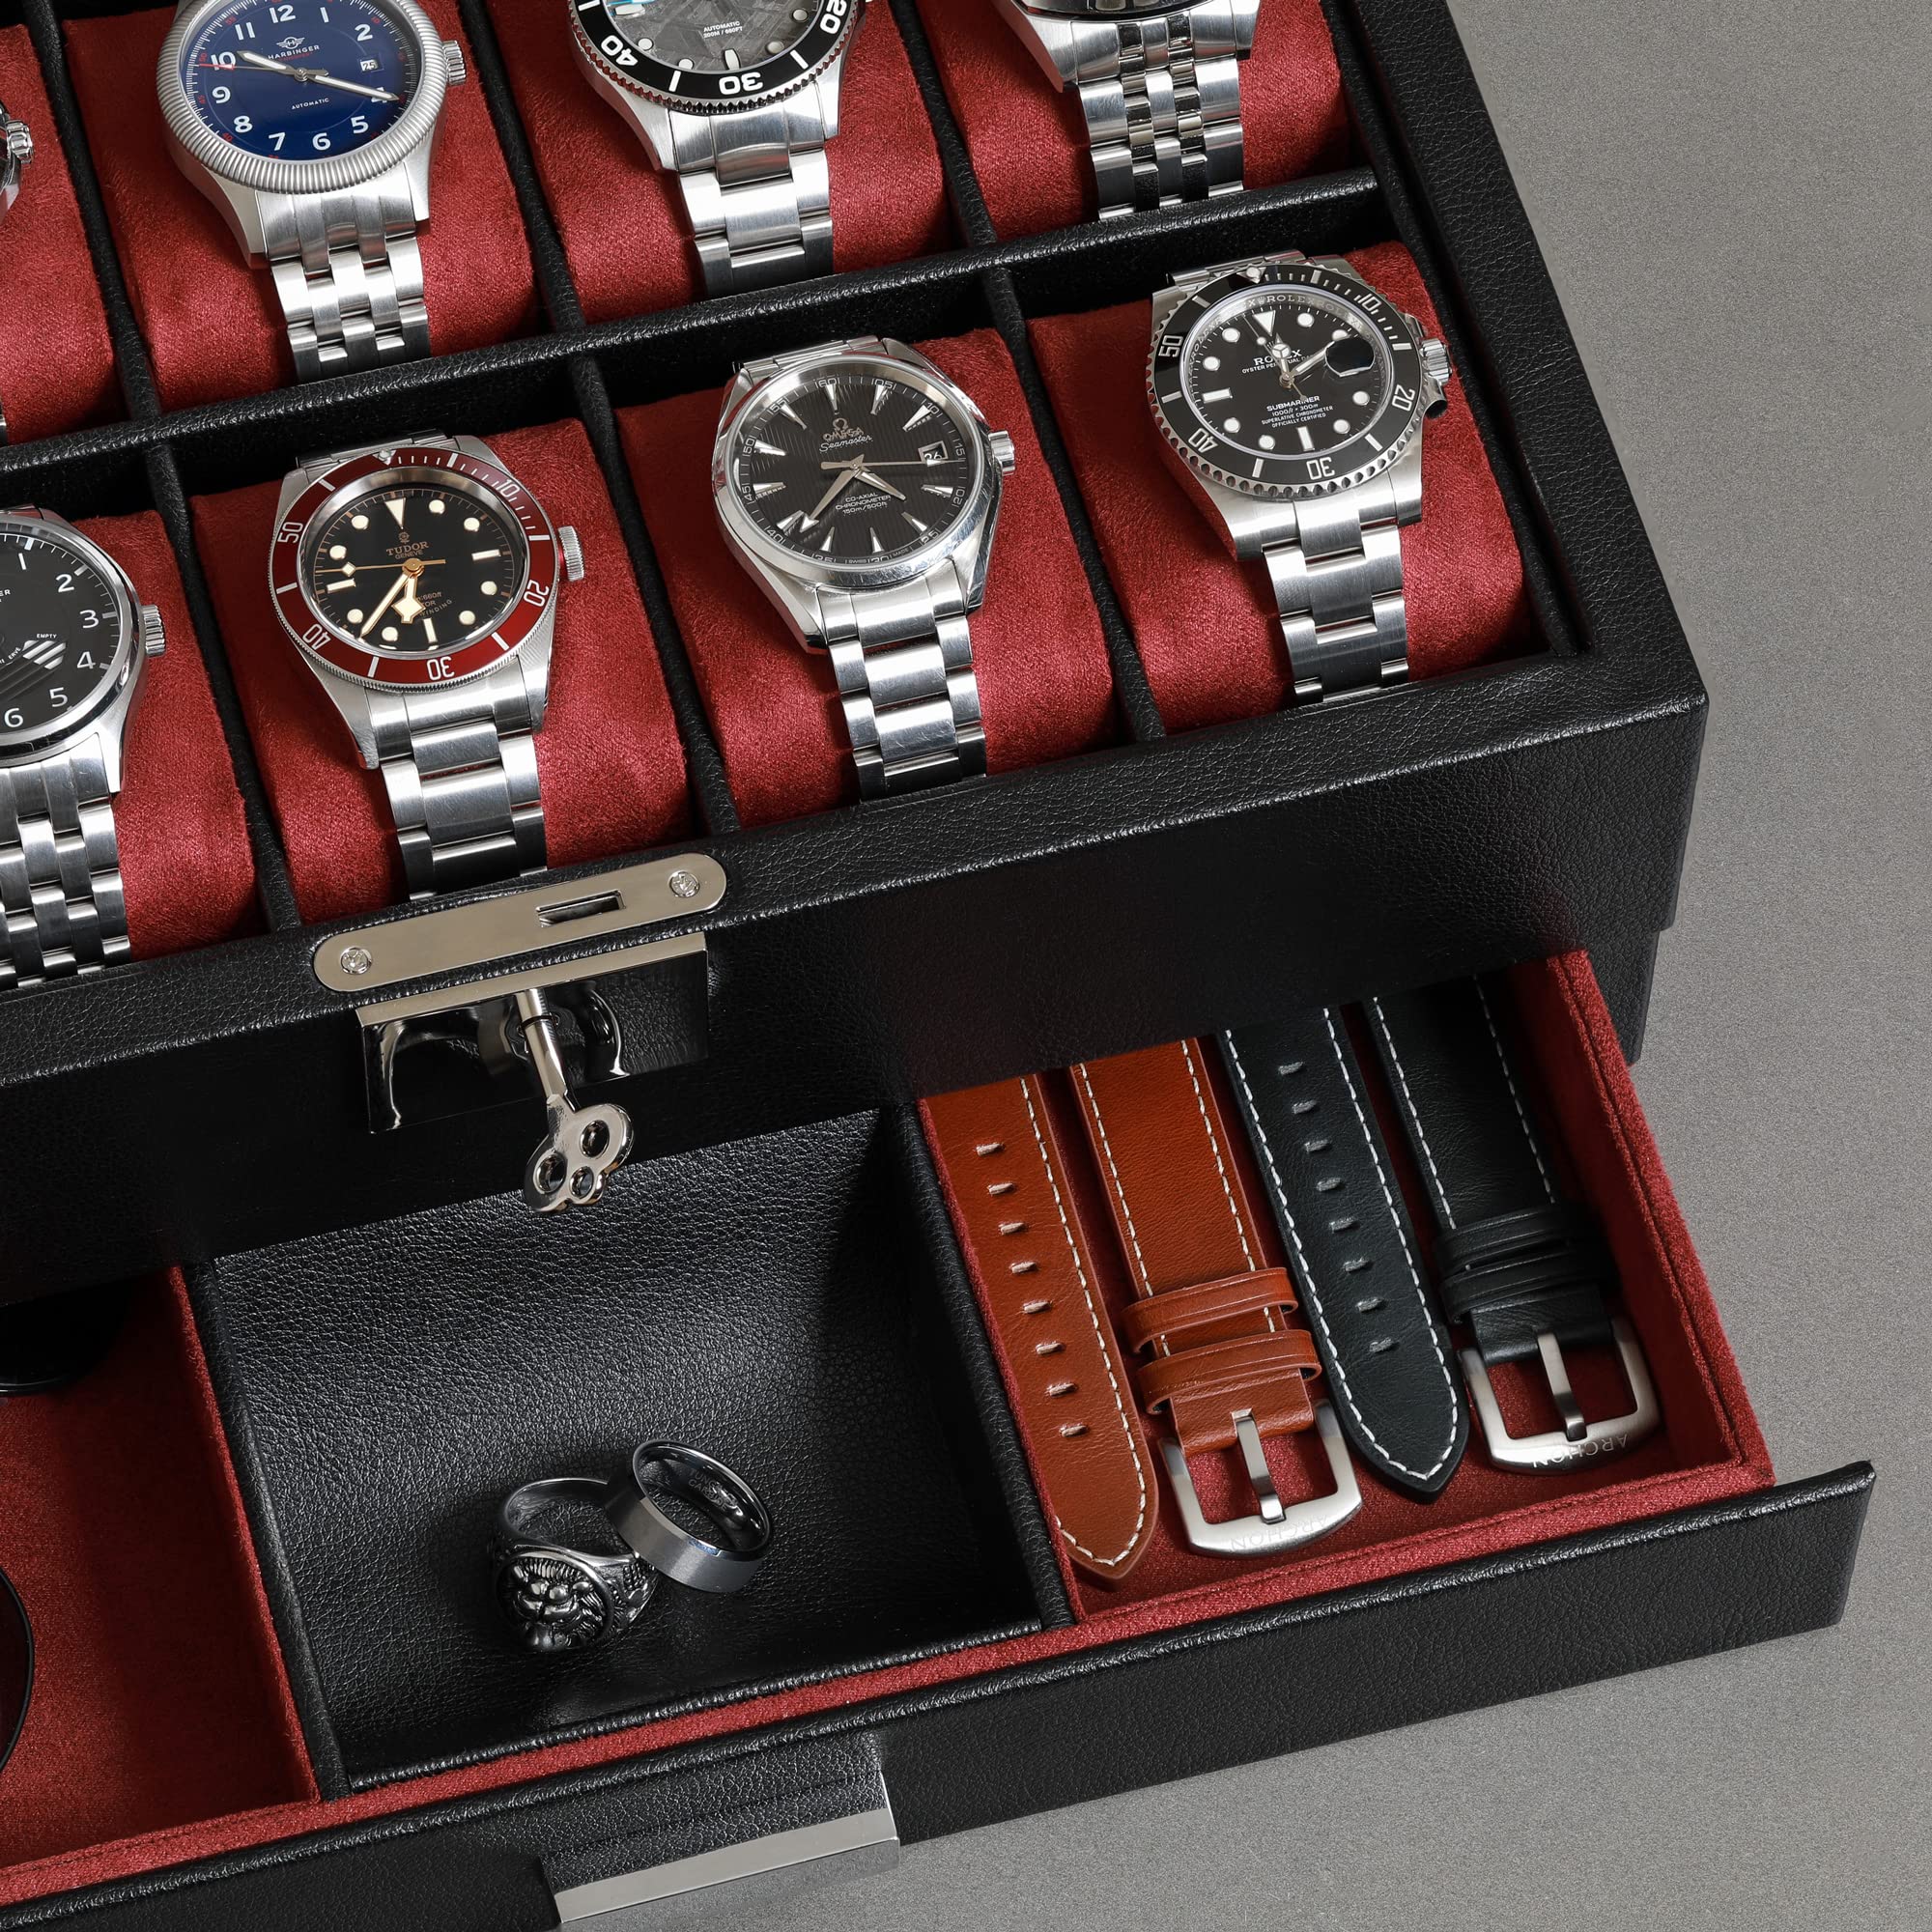 Gift Set 10 Slot Leather Watch Box with Valet Drawer & Matching 5 Watch Travel Case - Luxury Watch Case Display Organizer, Locking Mens Jewelry Watches Holder, Men's Storage Boxes Glass Top Black/Red